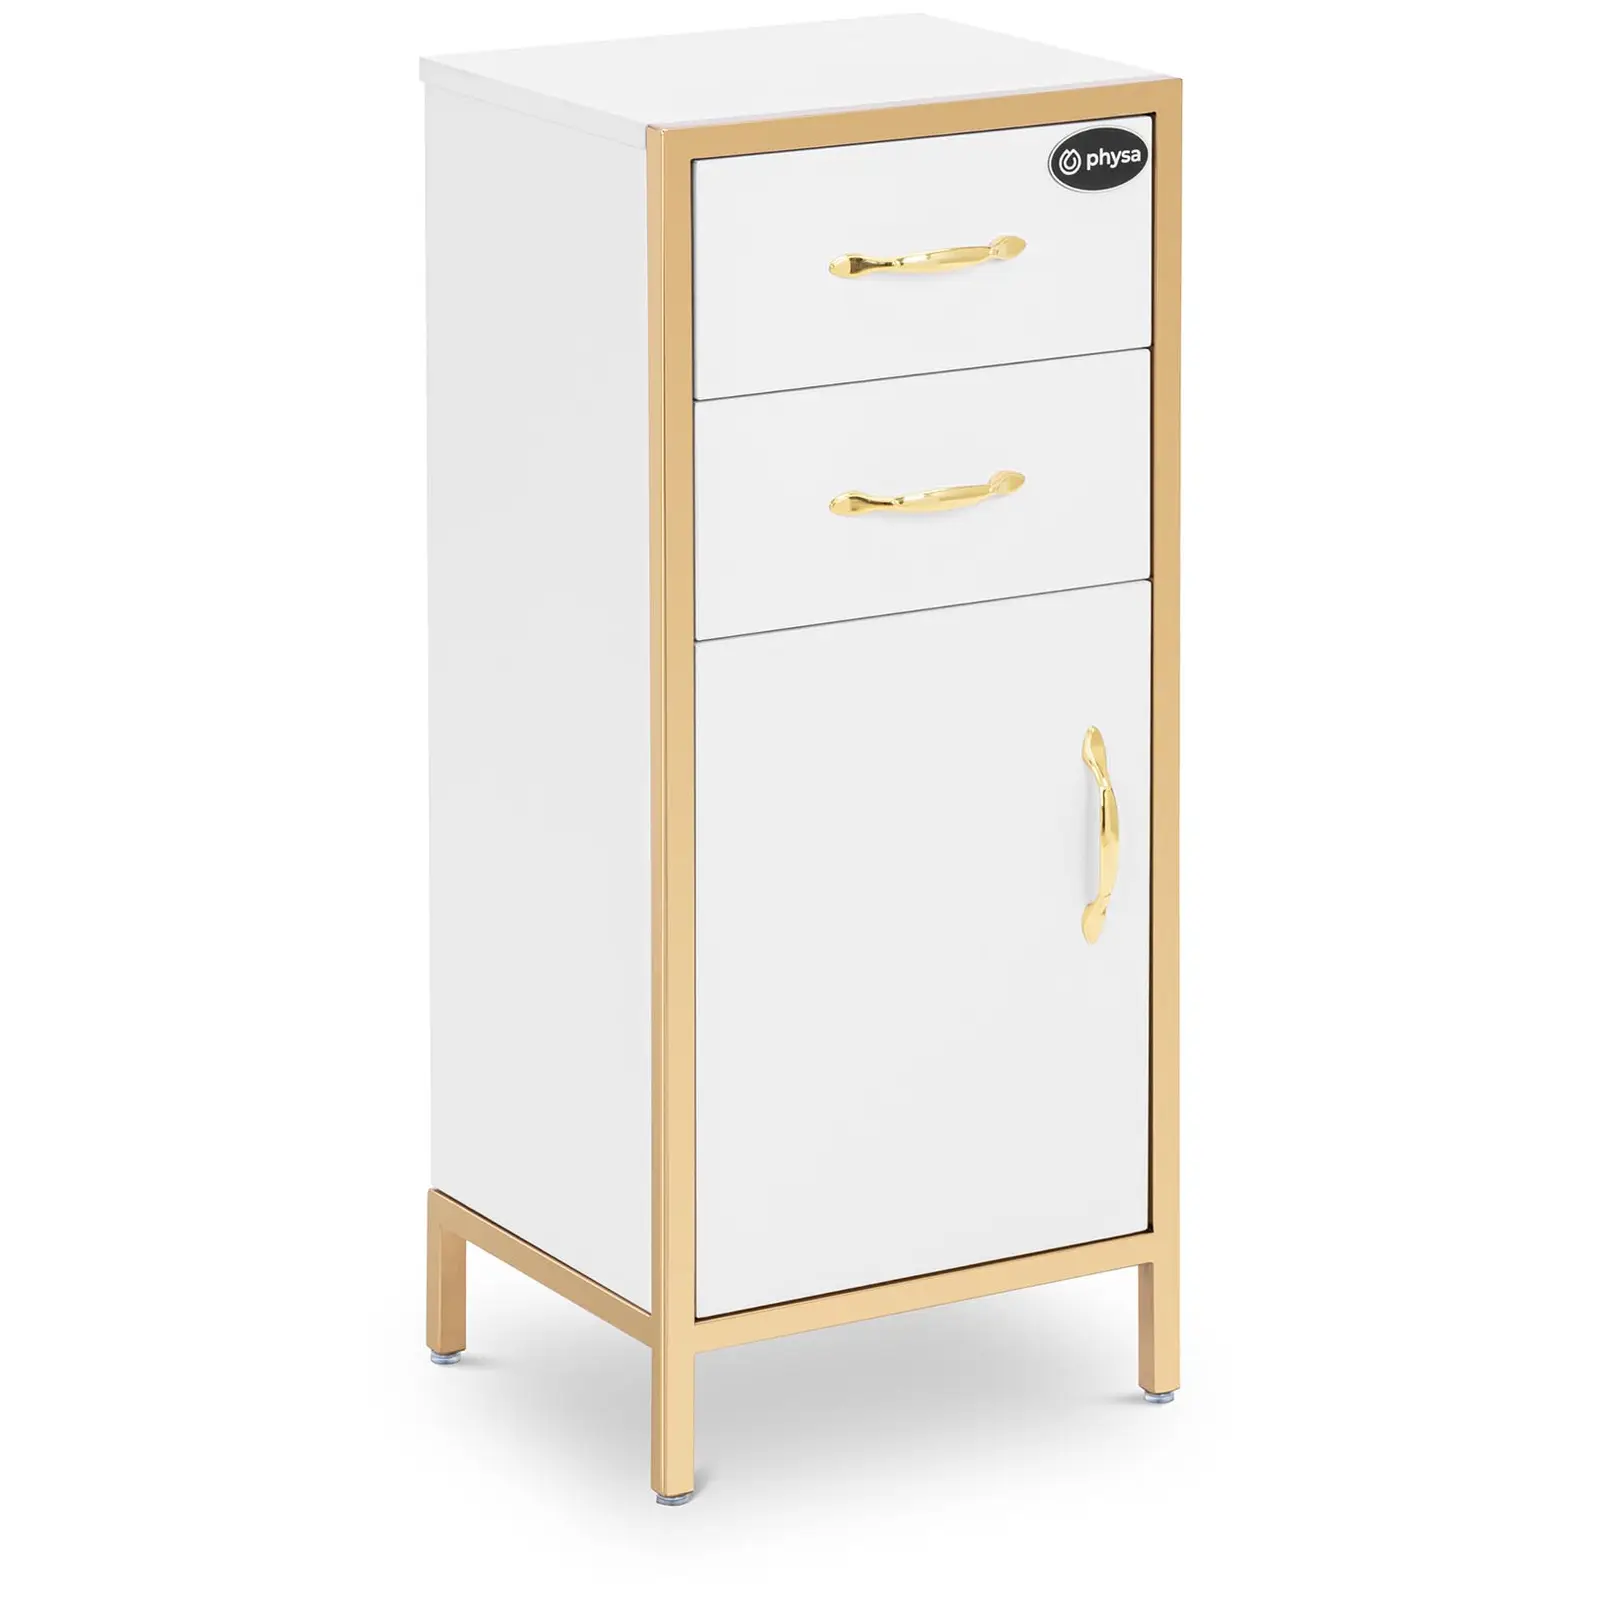 Beauty Cabinet - 40 x 30 x 80 cm - 2 drawers - 1 compartment - gold / white